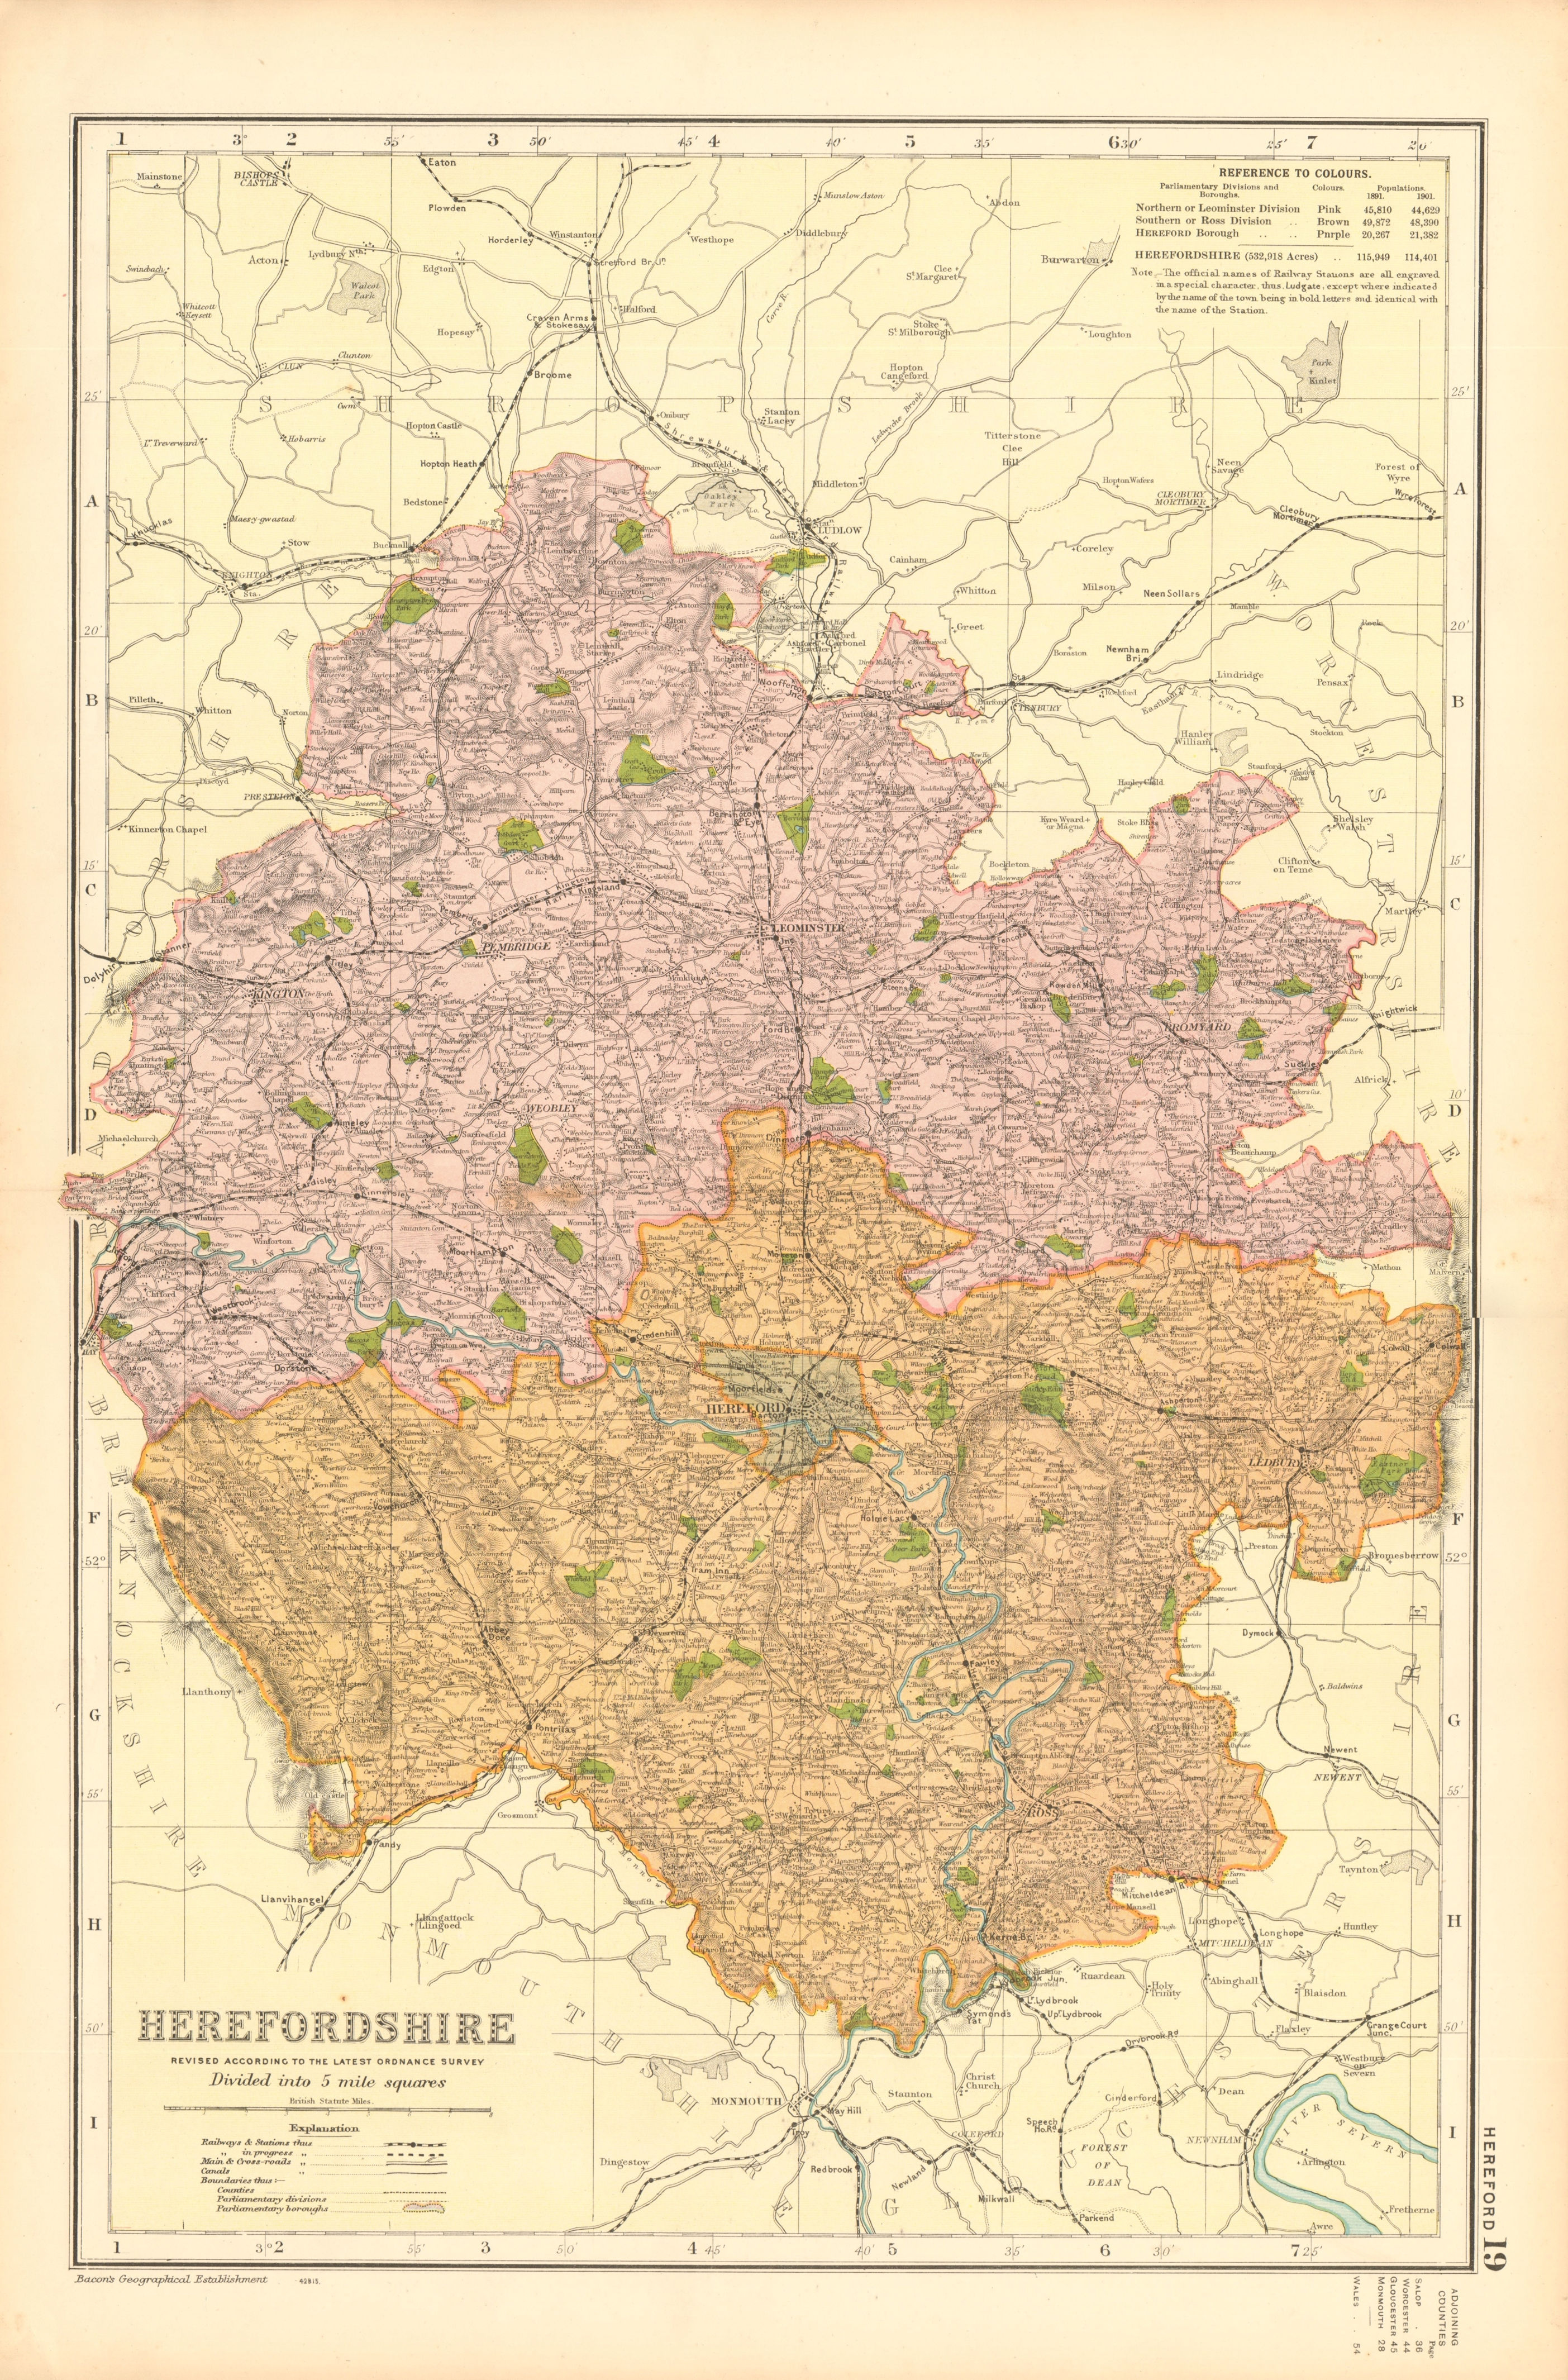 Associate Product HEREFORDSHIRE. Showing Parliamentary divisions, boroughs & parks. BACON 1904 map